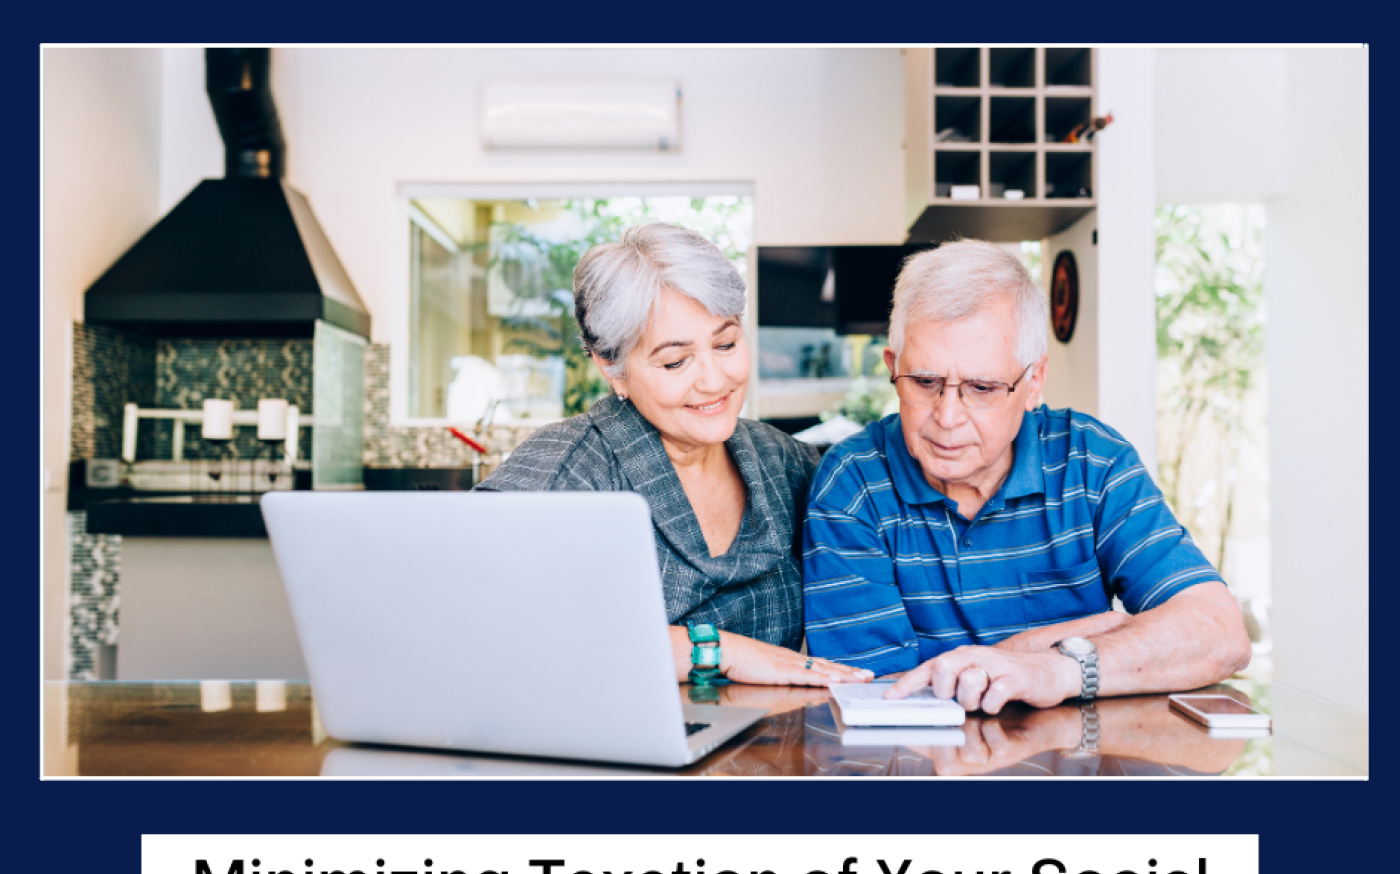 Minimizing Taxation of Your Social Security Retirement Benefit